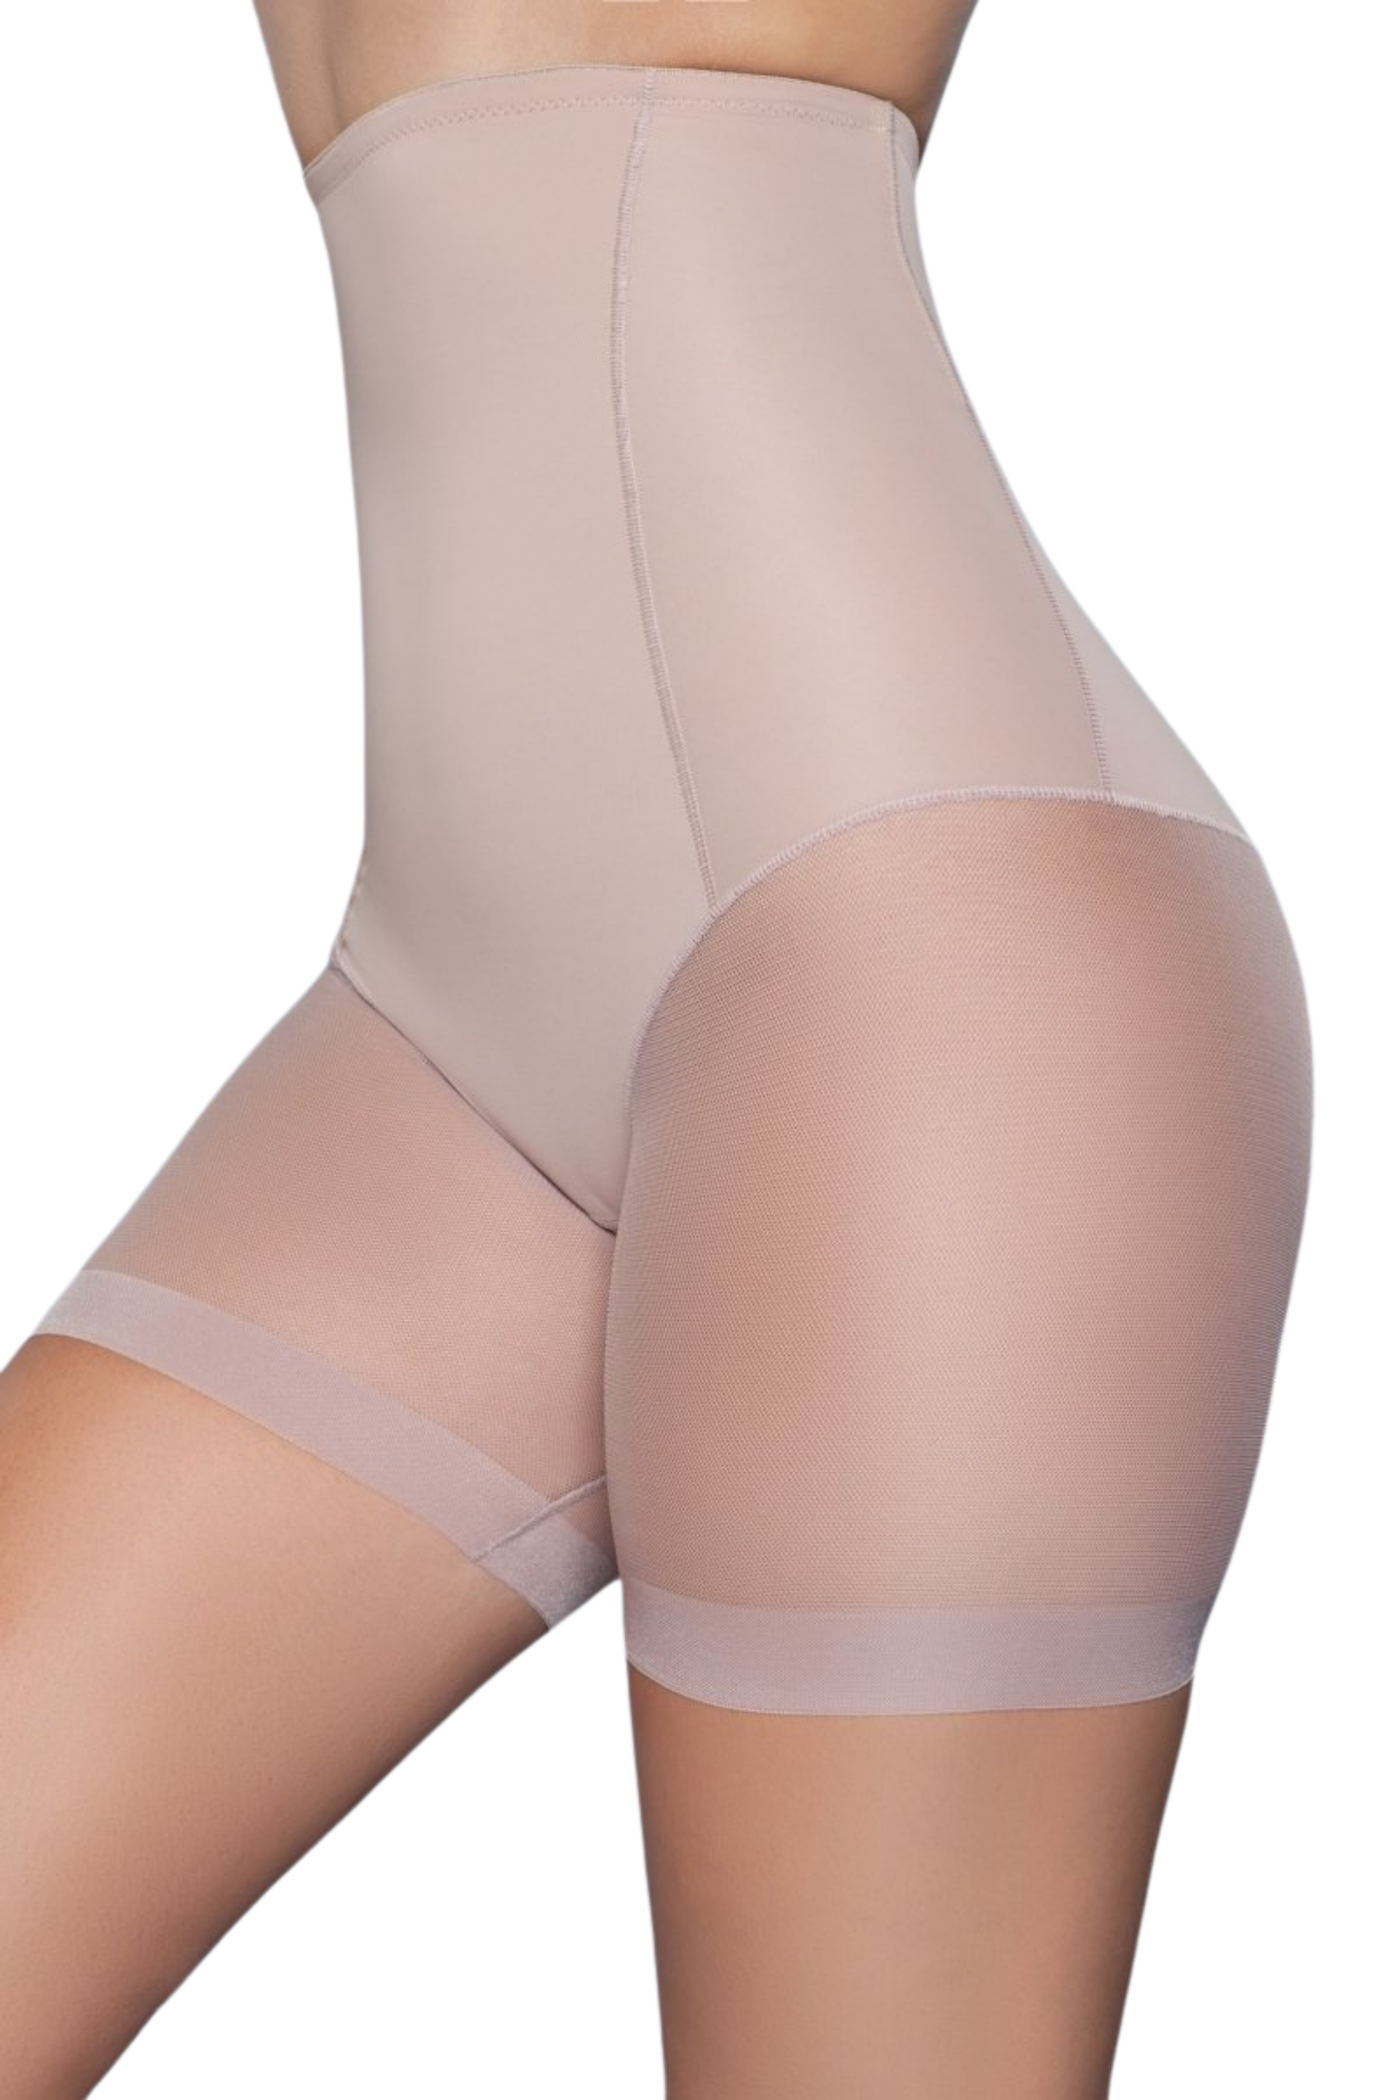 Shapewear Shorts - For Love of Lingerie